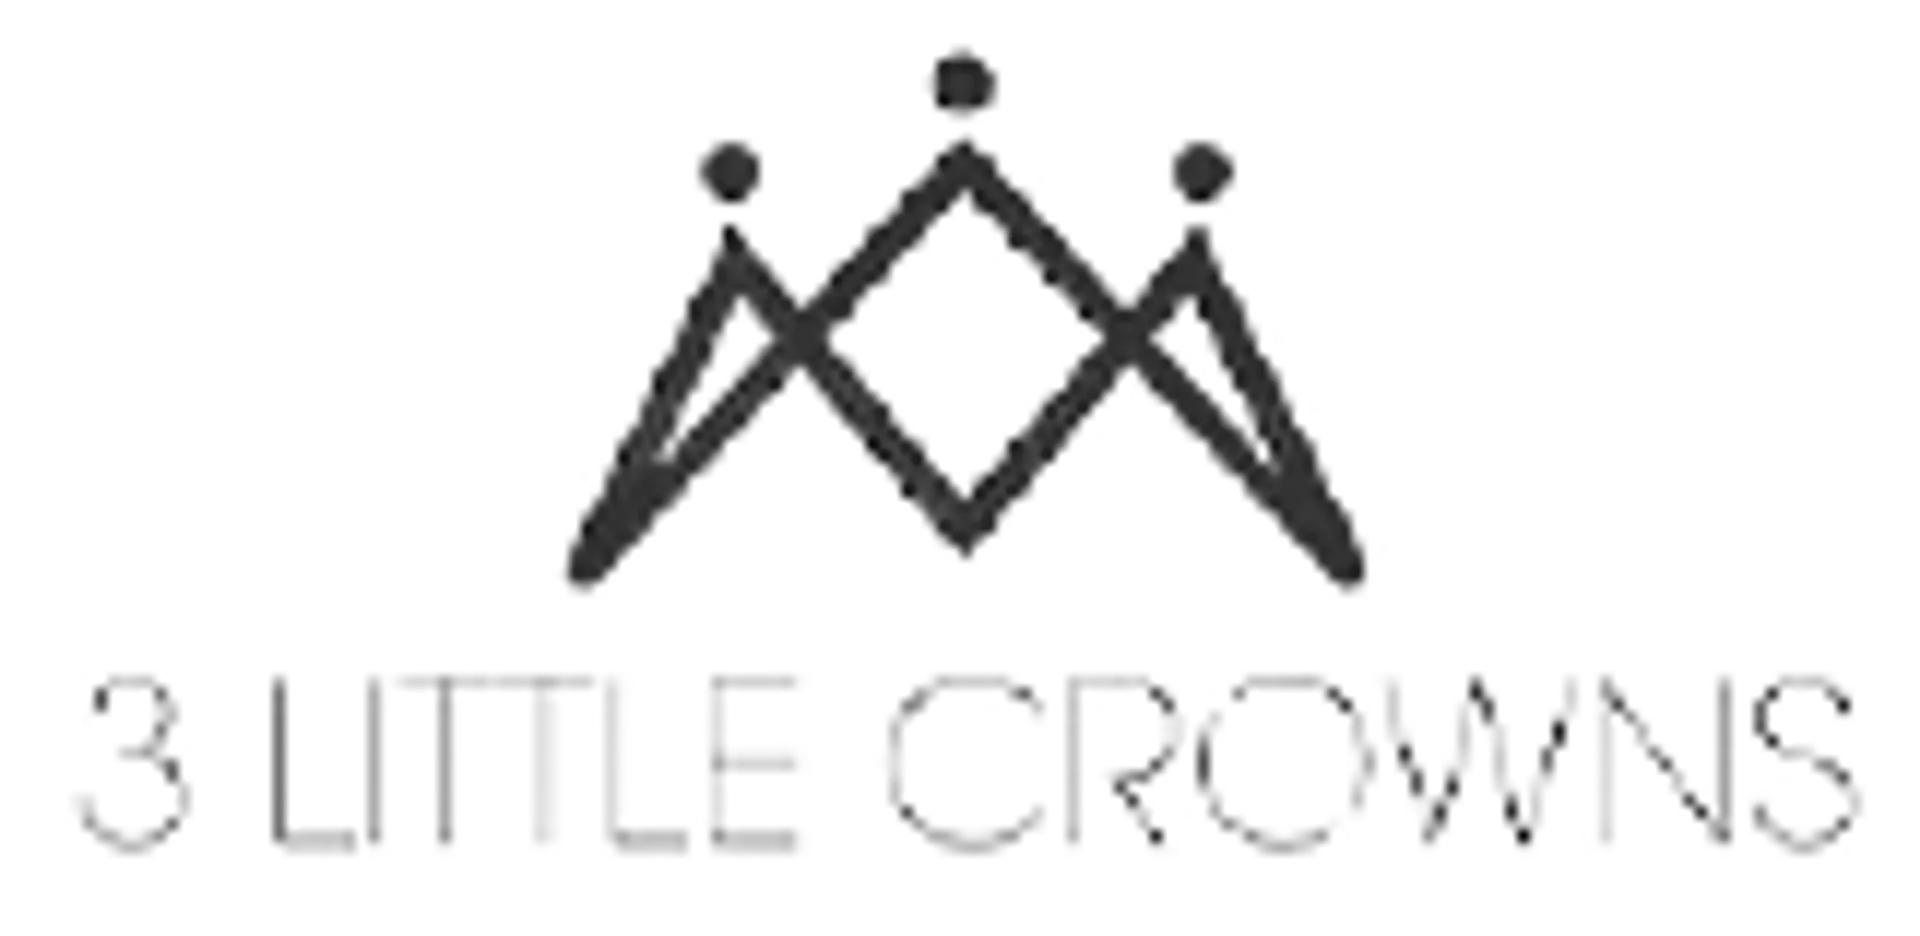 3 LITTLE CROWNS logo. Current weekly ad